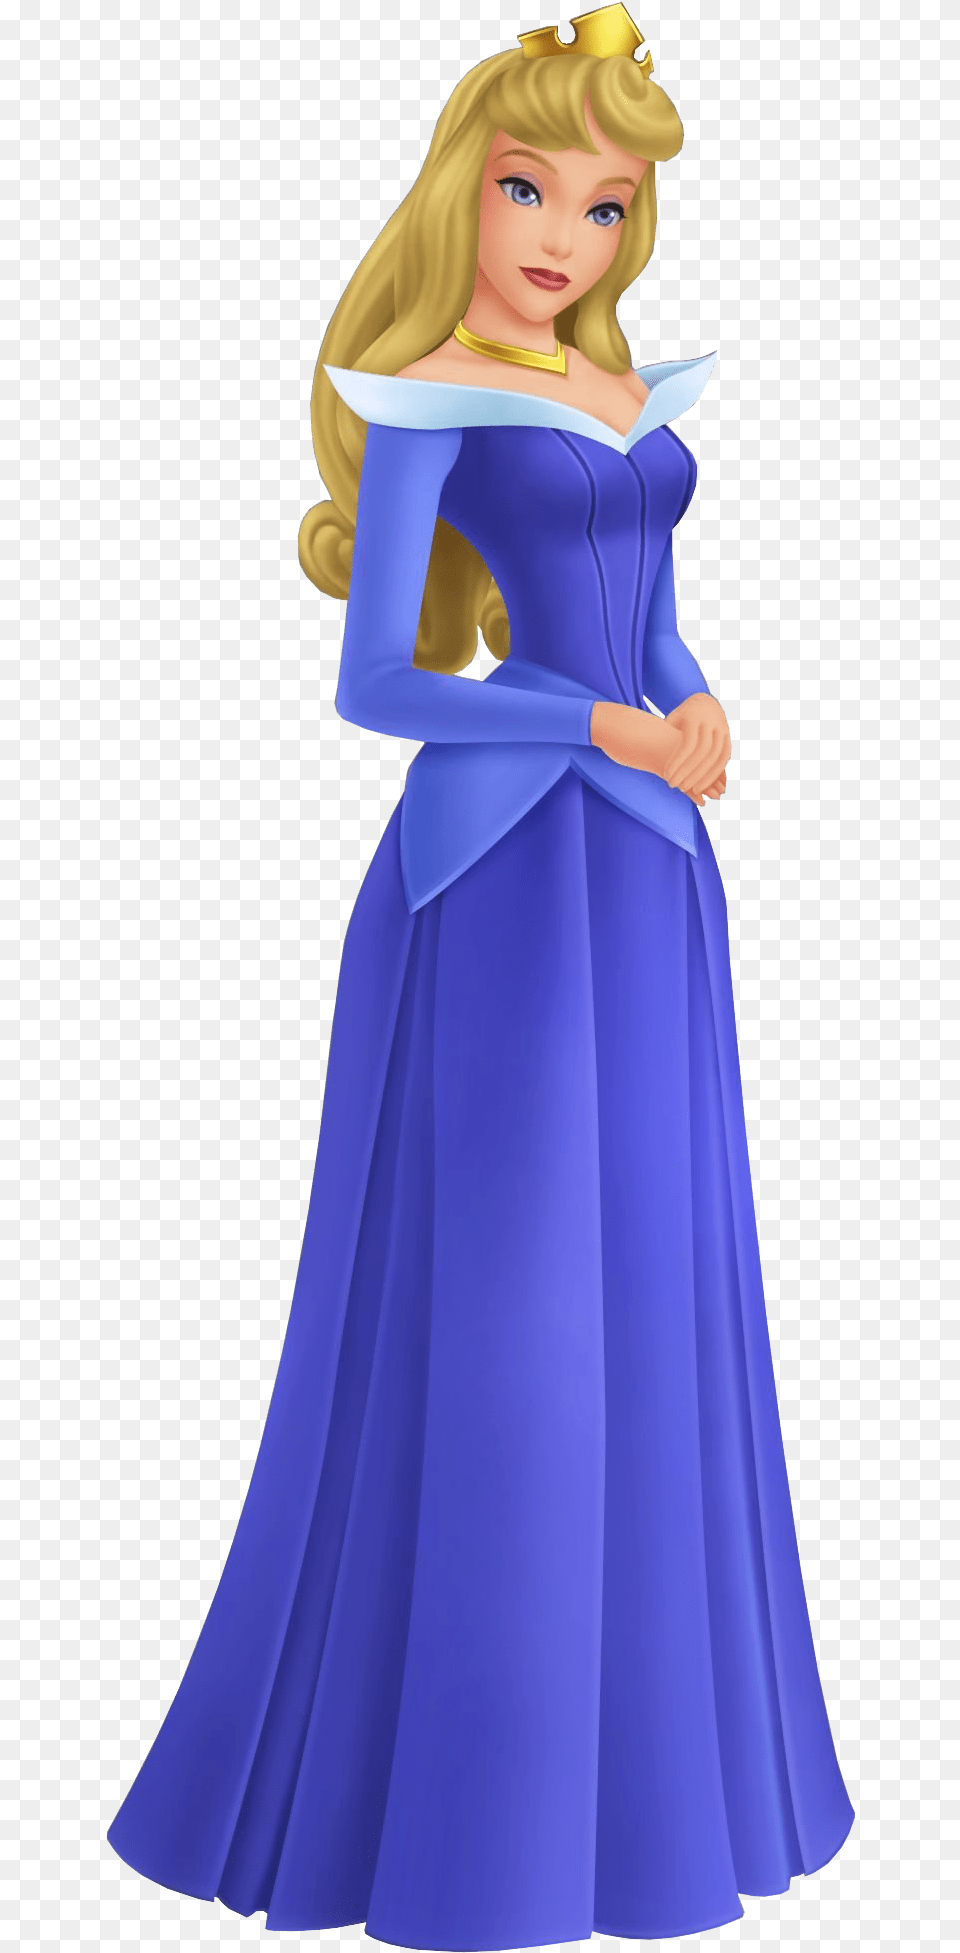 Aurora In Kingdom Hearts I And Kingdom Hearts Sleeping Beauty Dress Disney, Fashion, Clothing, Gown, Formal Wear Free Transparent Png